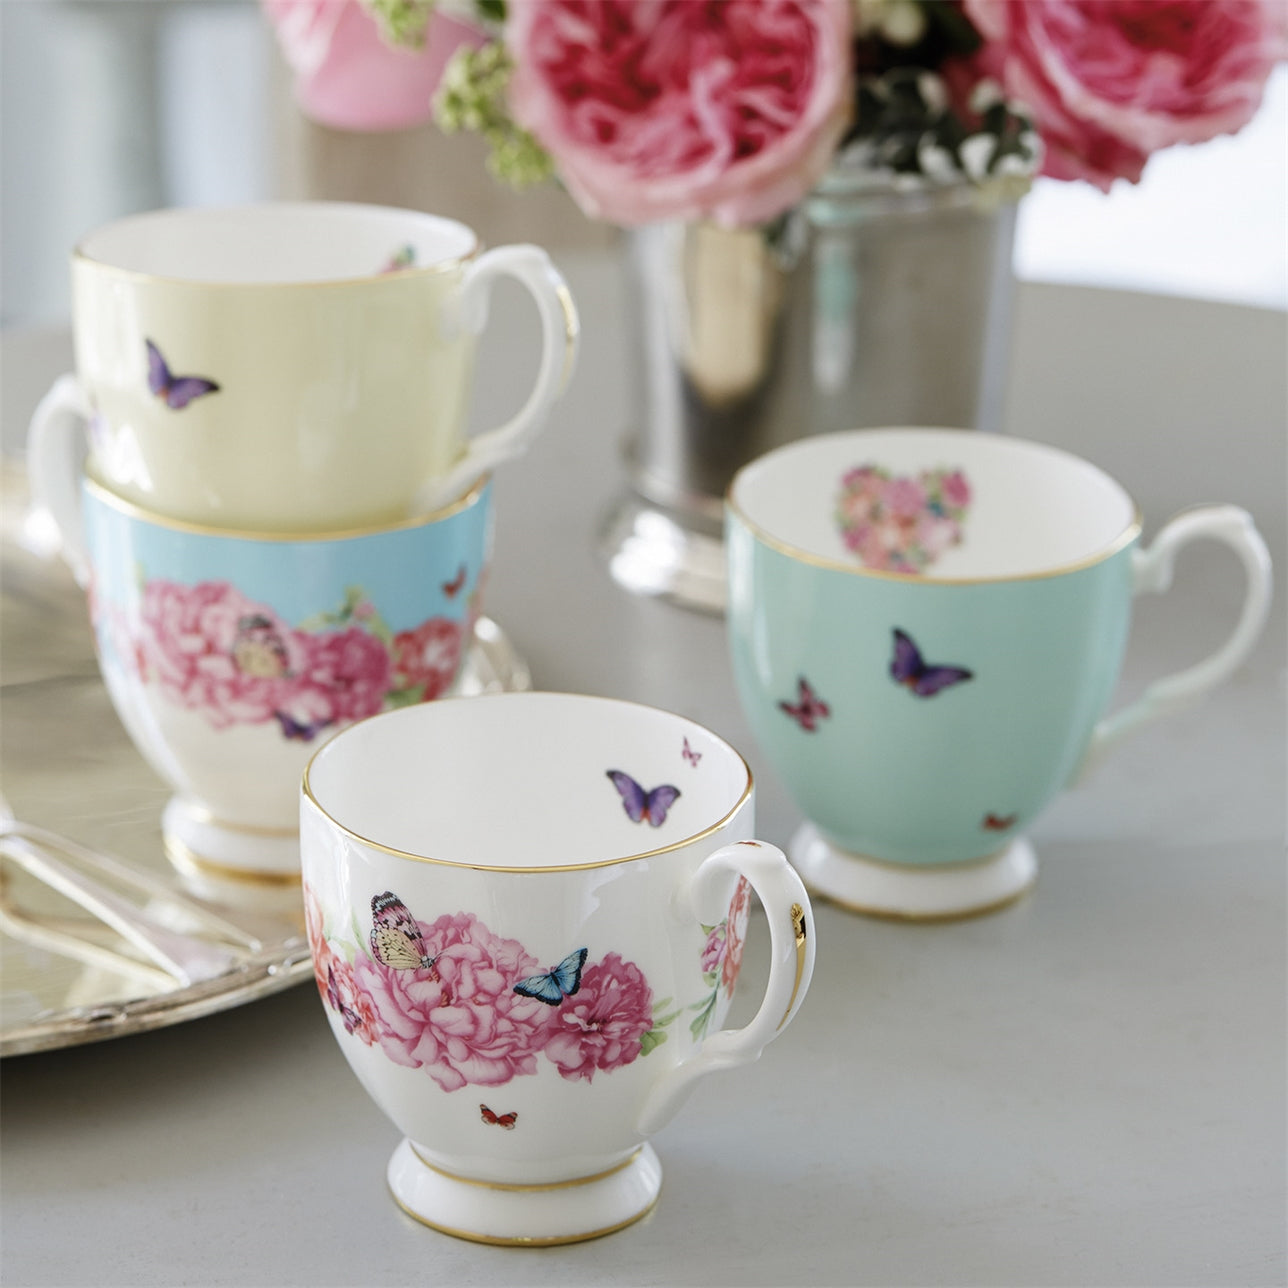 Royal Albert Miranda Kerr Gratitude Mug  Delicate, delightful and totally Miranda, makes this item the perfect gift for the sophisticated and feminine woman, who enjoys to celebrate with friends or simply when she needs to take time for herself with a nice mug of tea or coffee. 'Gratitude' features a sophisticated scattering of peach and pink peony flowers; peppered with signature multi-coloured, purple and turquoise butterflies.